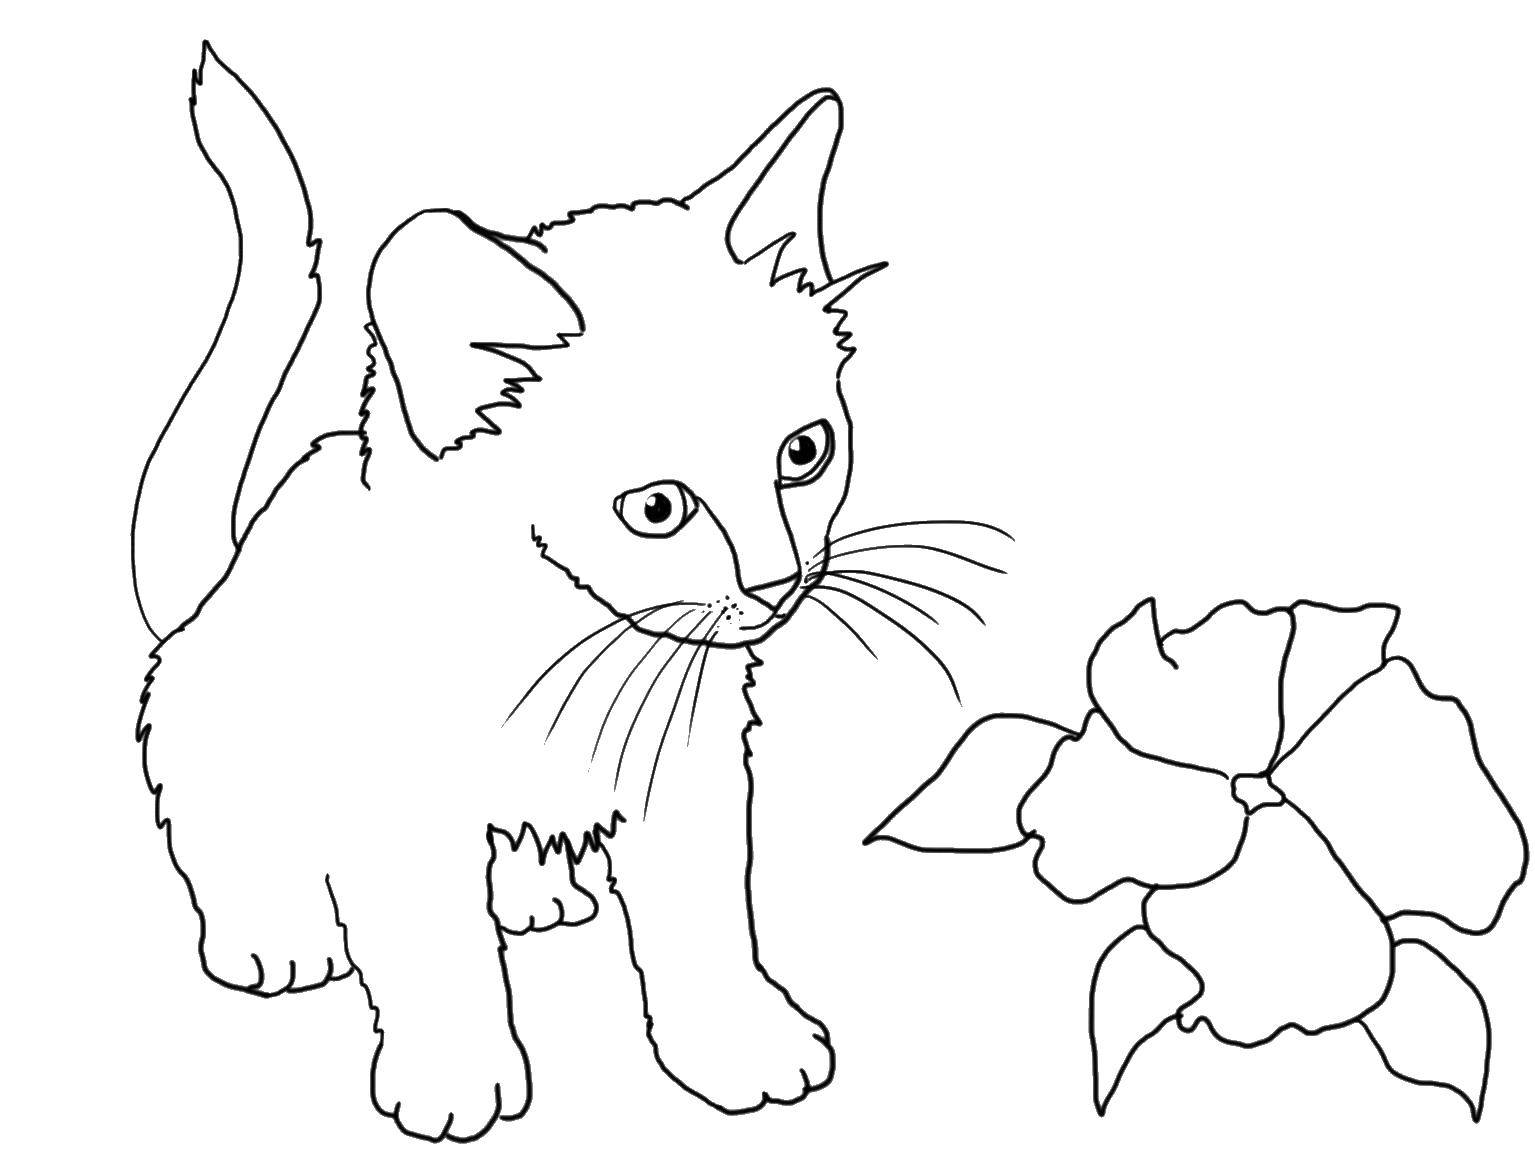 Coloring Kitten and flower. Category Cats and kittens. Tags:  animals, kitty, cat, flower.